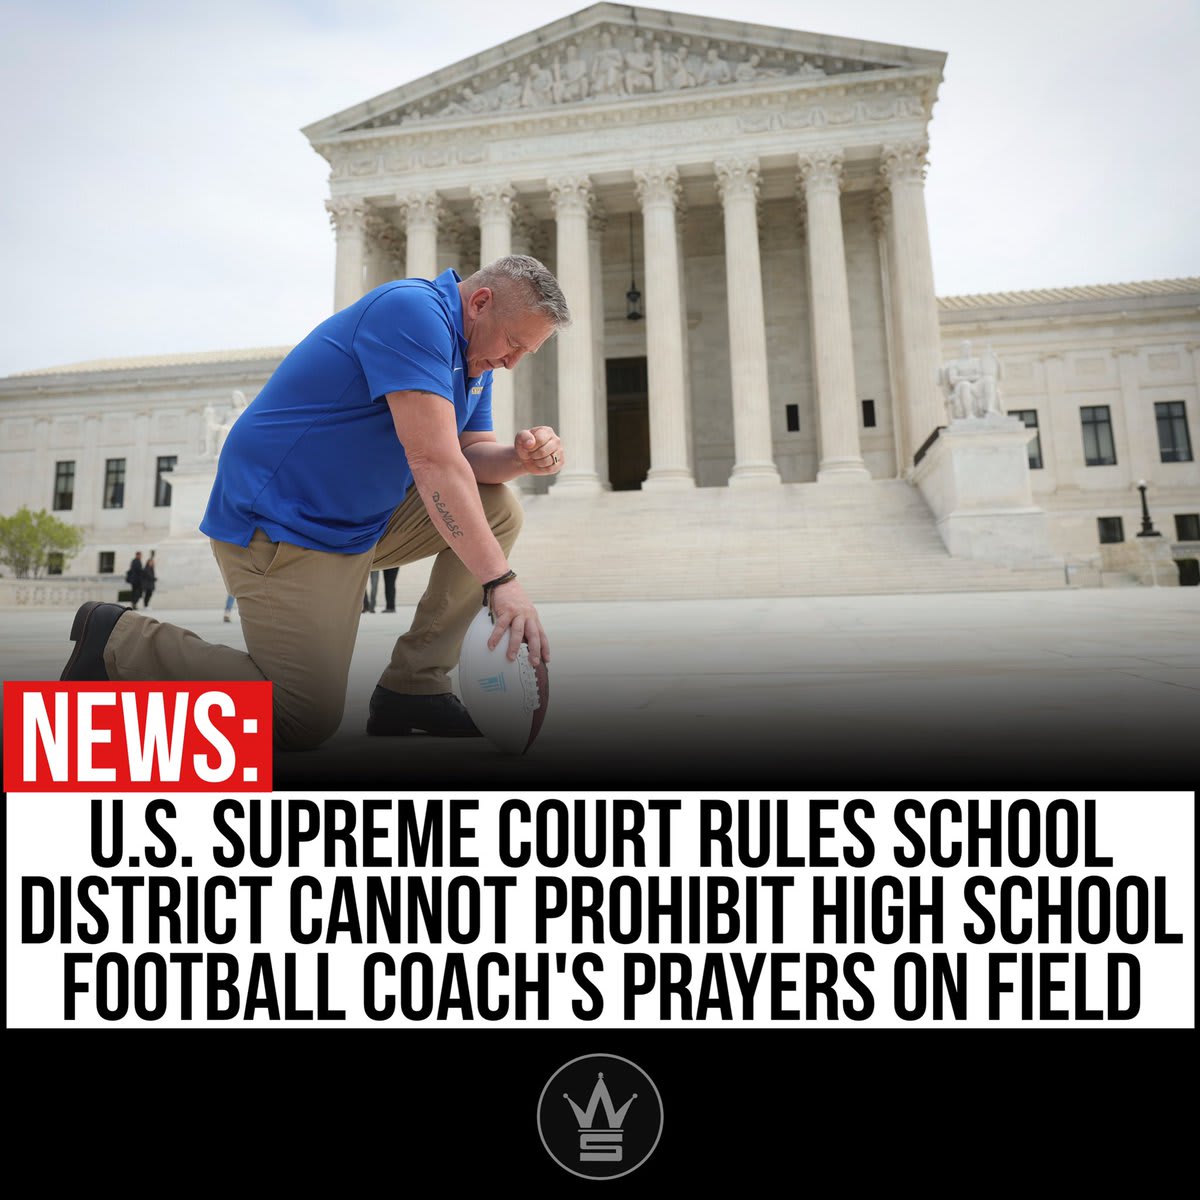 According to reports, the U.S. Supreme Court has decided that a Washington state school district violated High School Football Coach’s prayers on the field. Read More, Click Here